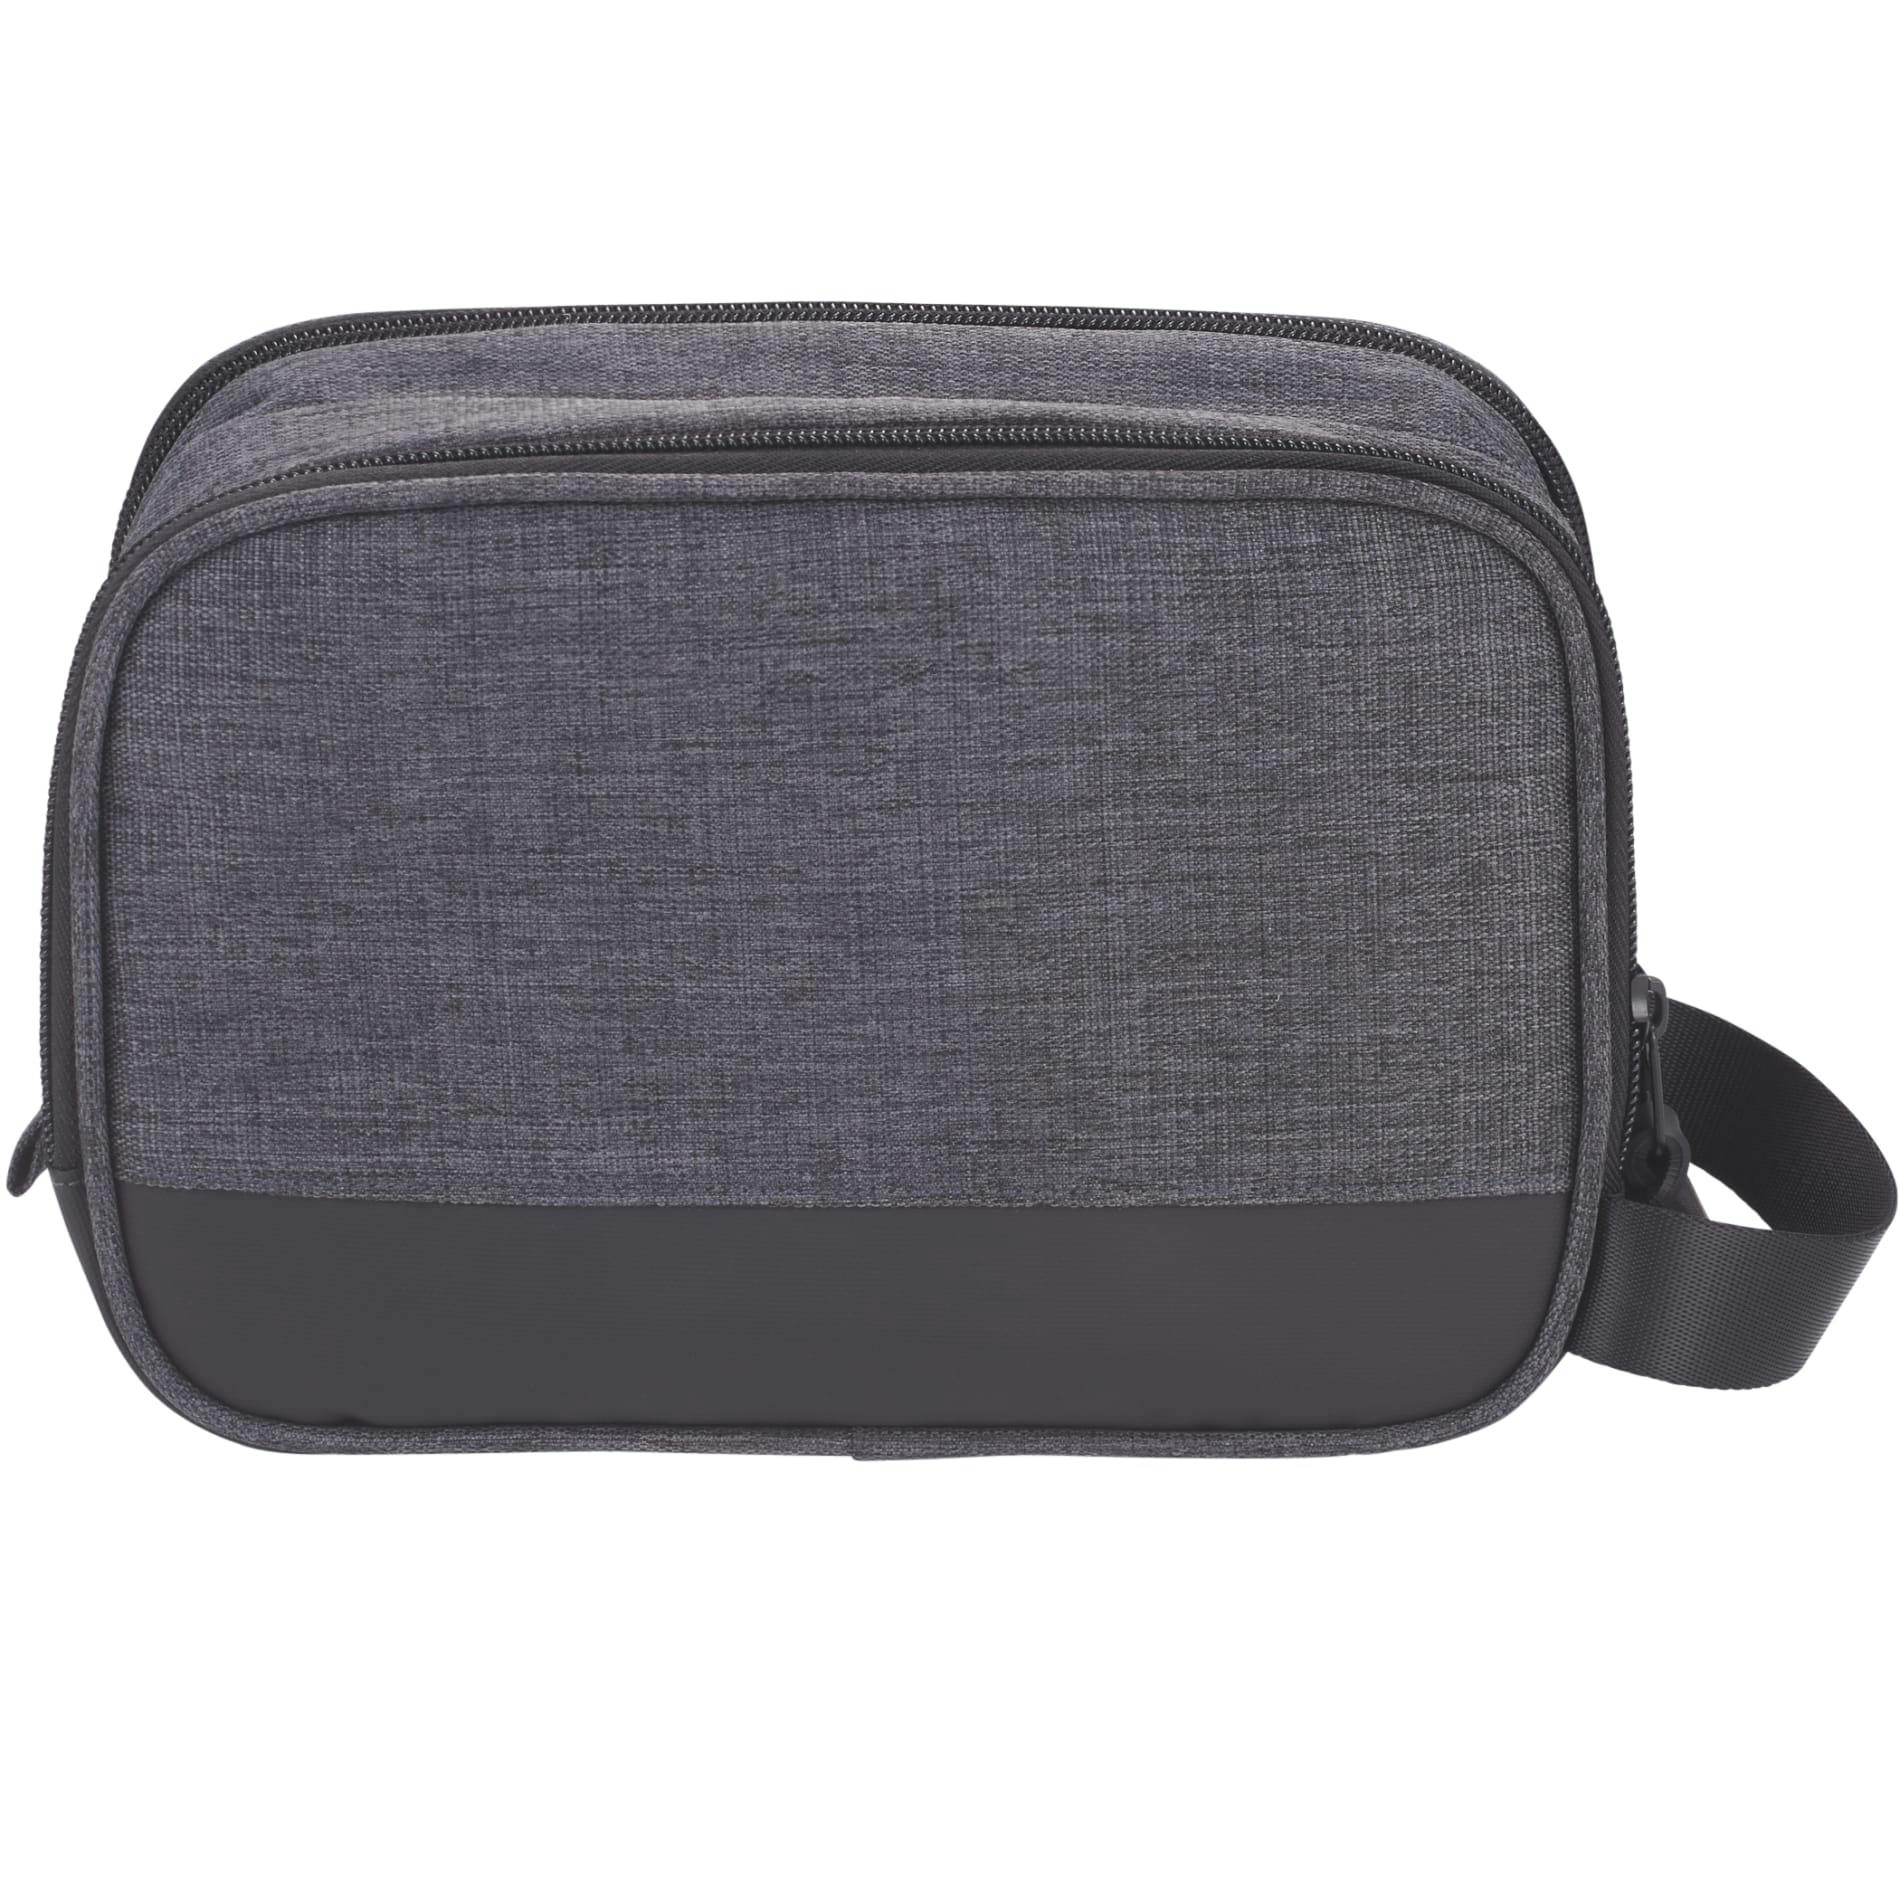 Wenger RPET Dual Compartment Dopp Kit - additional Image 4